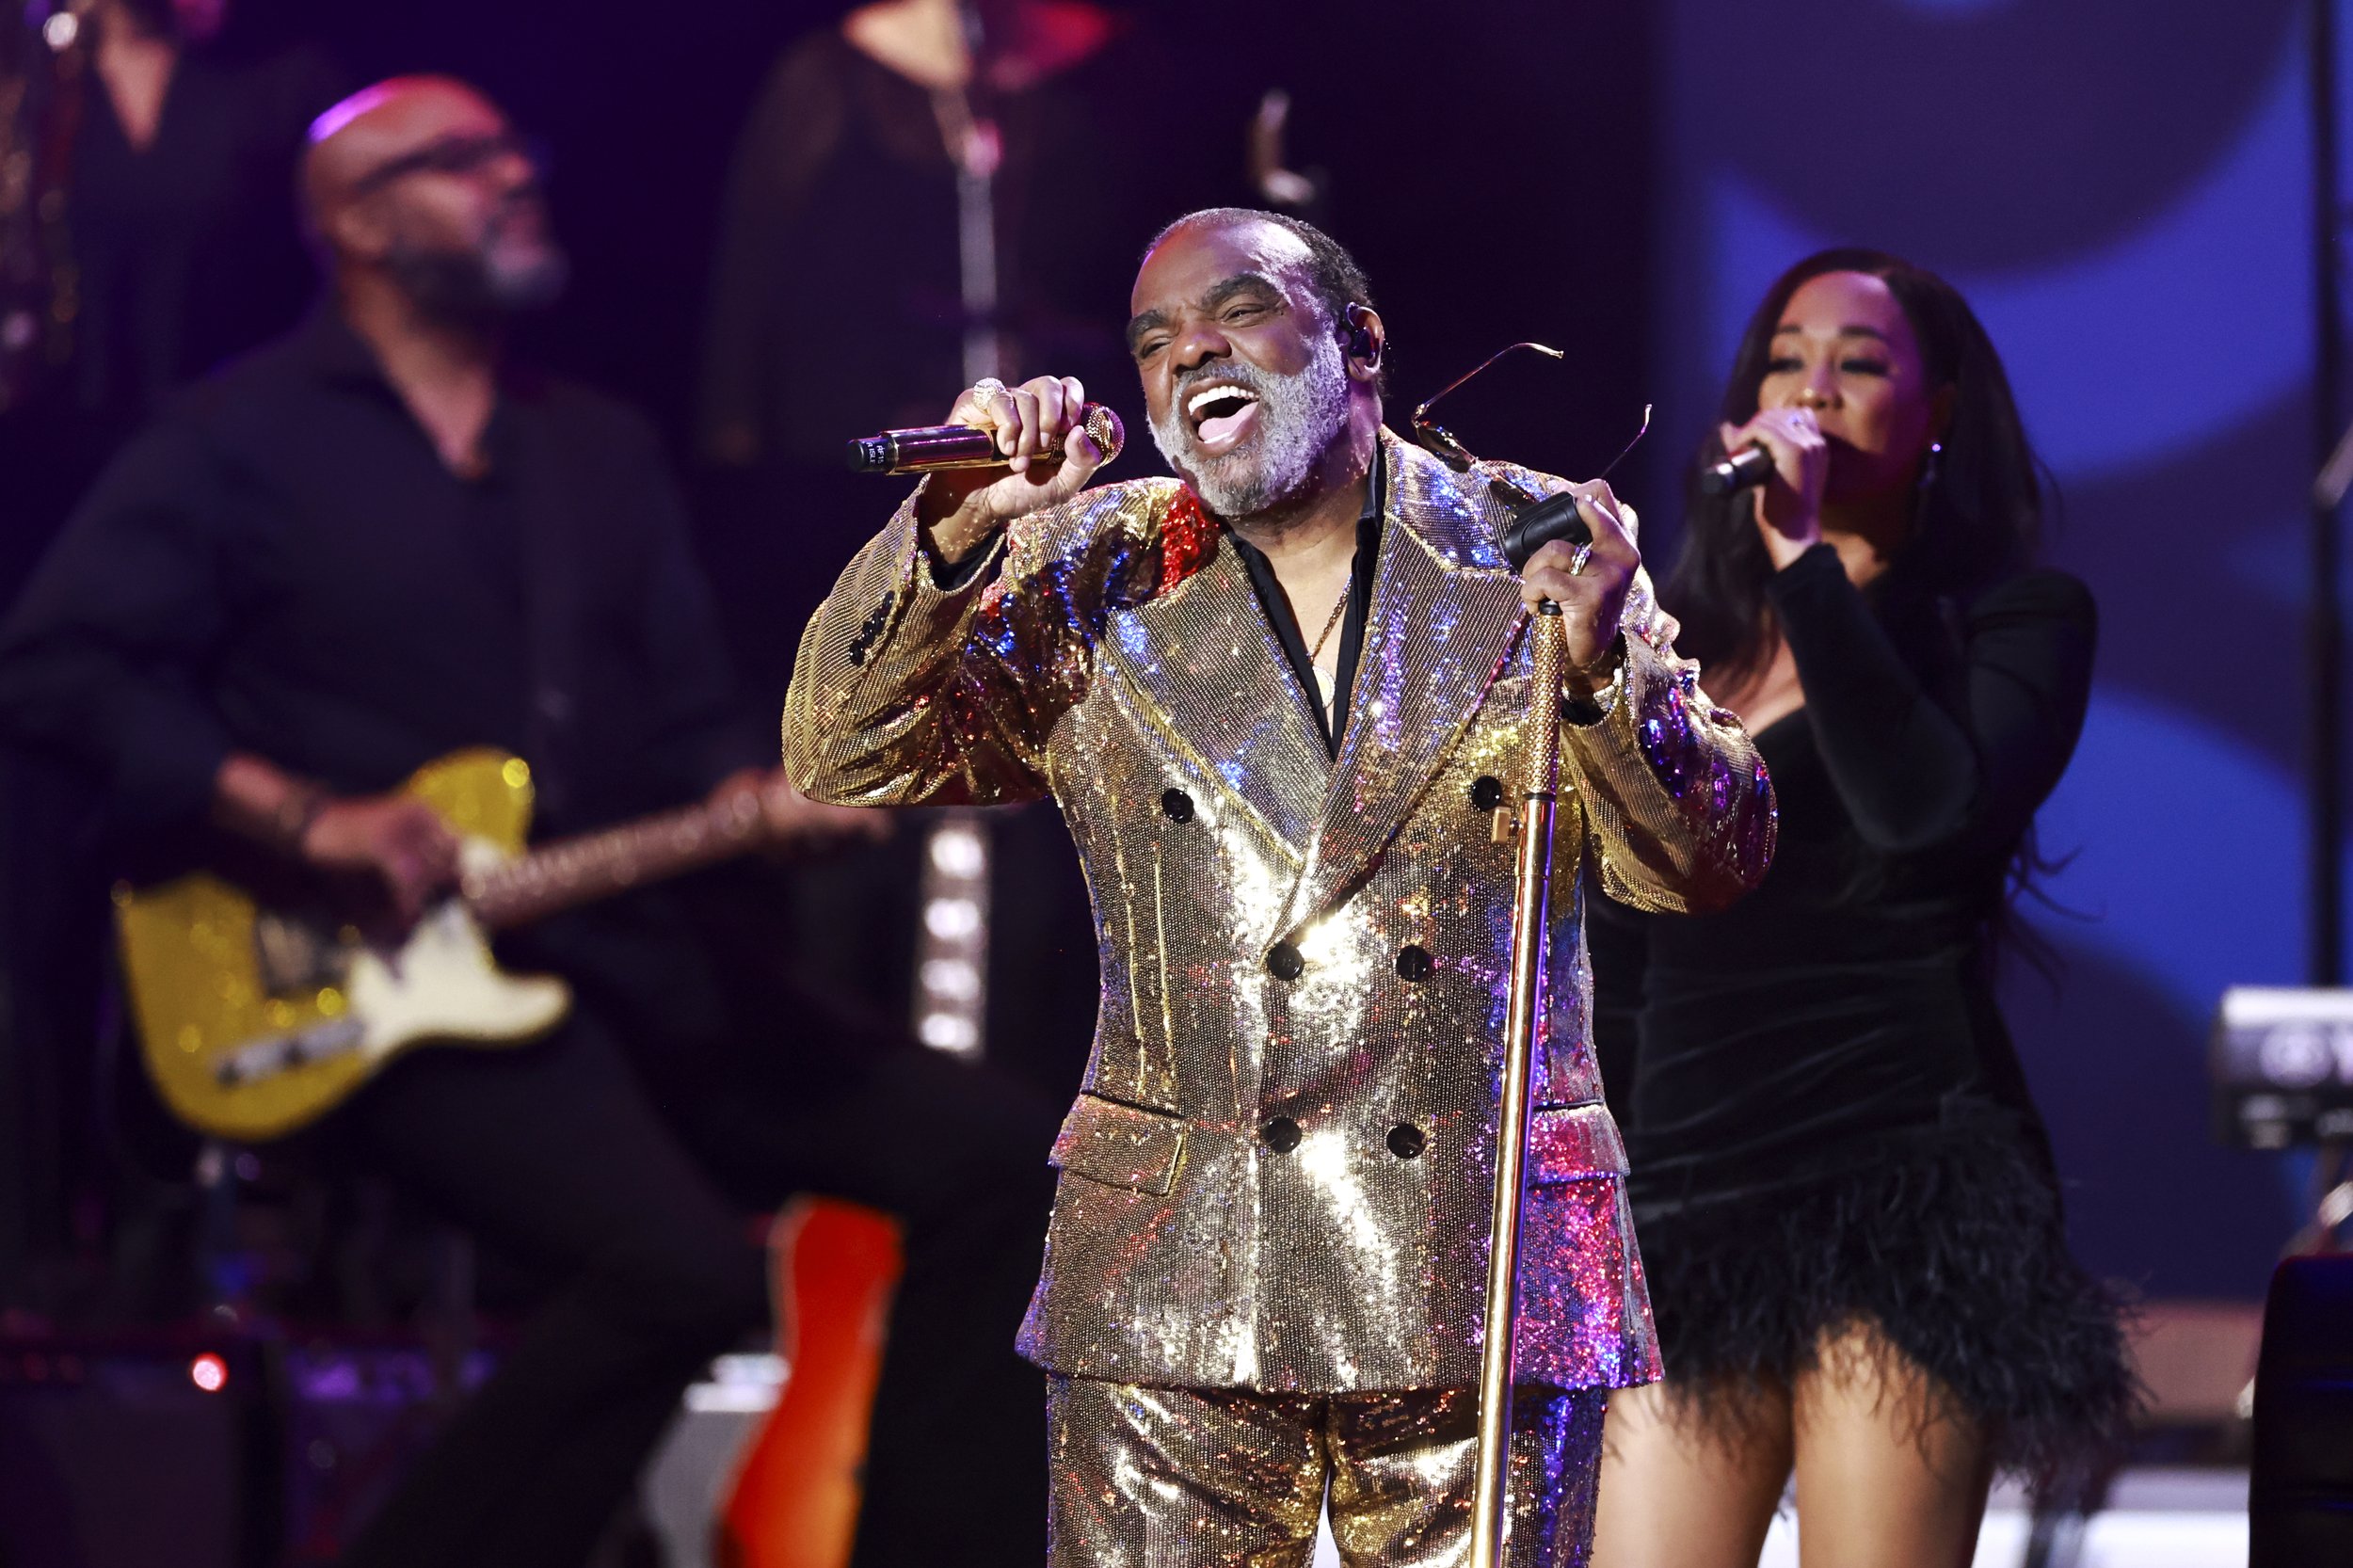  LOS ANGELES, CALIFORNIA - FEBRUARY 03: Ronald Isley of The Isley Brothers performs onstage during MusiCares Persons of the Year Honoring Berry Gordy and Smokey Robinson at Los Angeles Convention Center on February 03, 2023 in Los Angeles, California